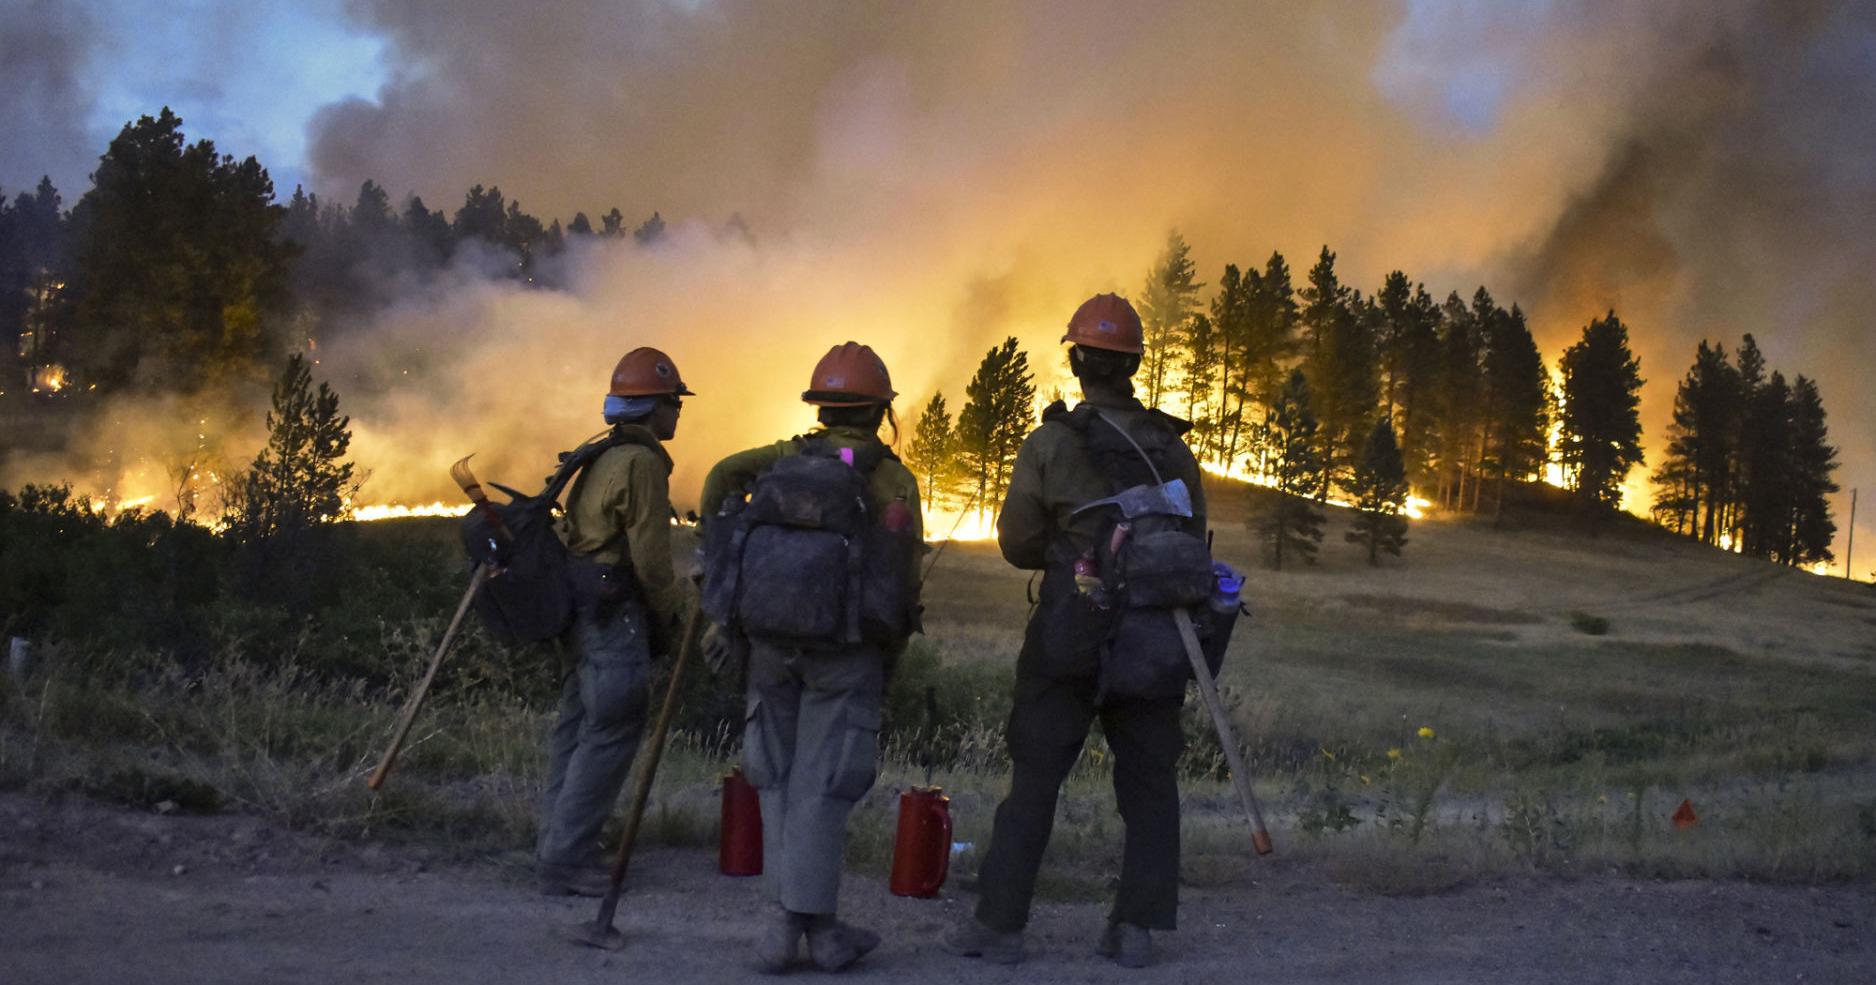 Opinion: Sound policies needed to reduce wildfire risk